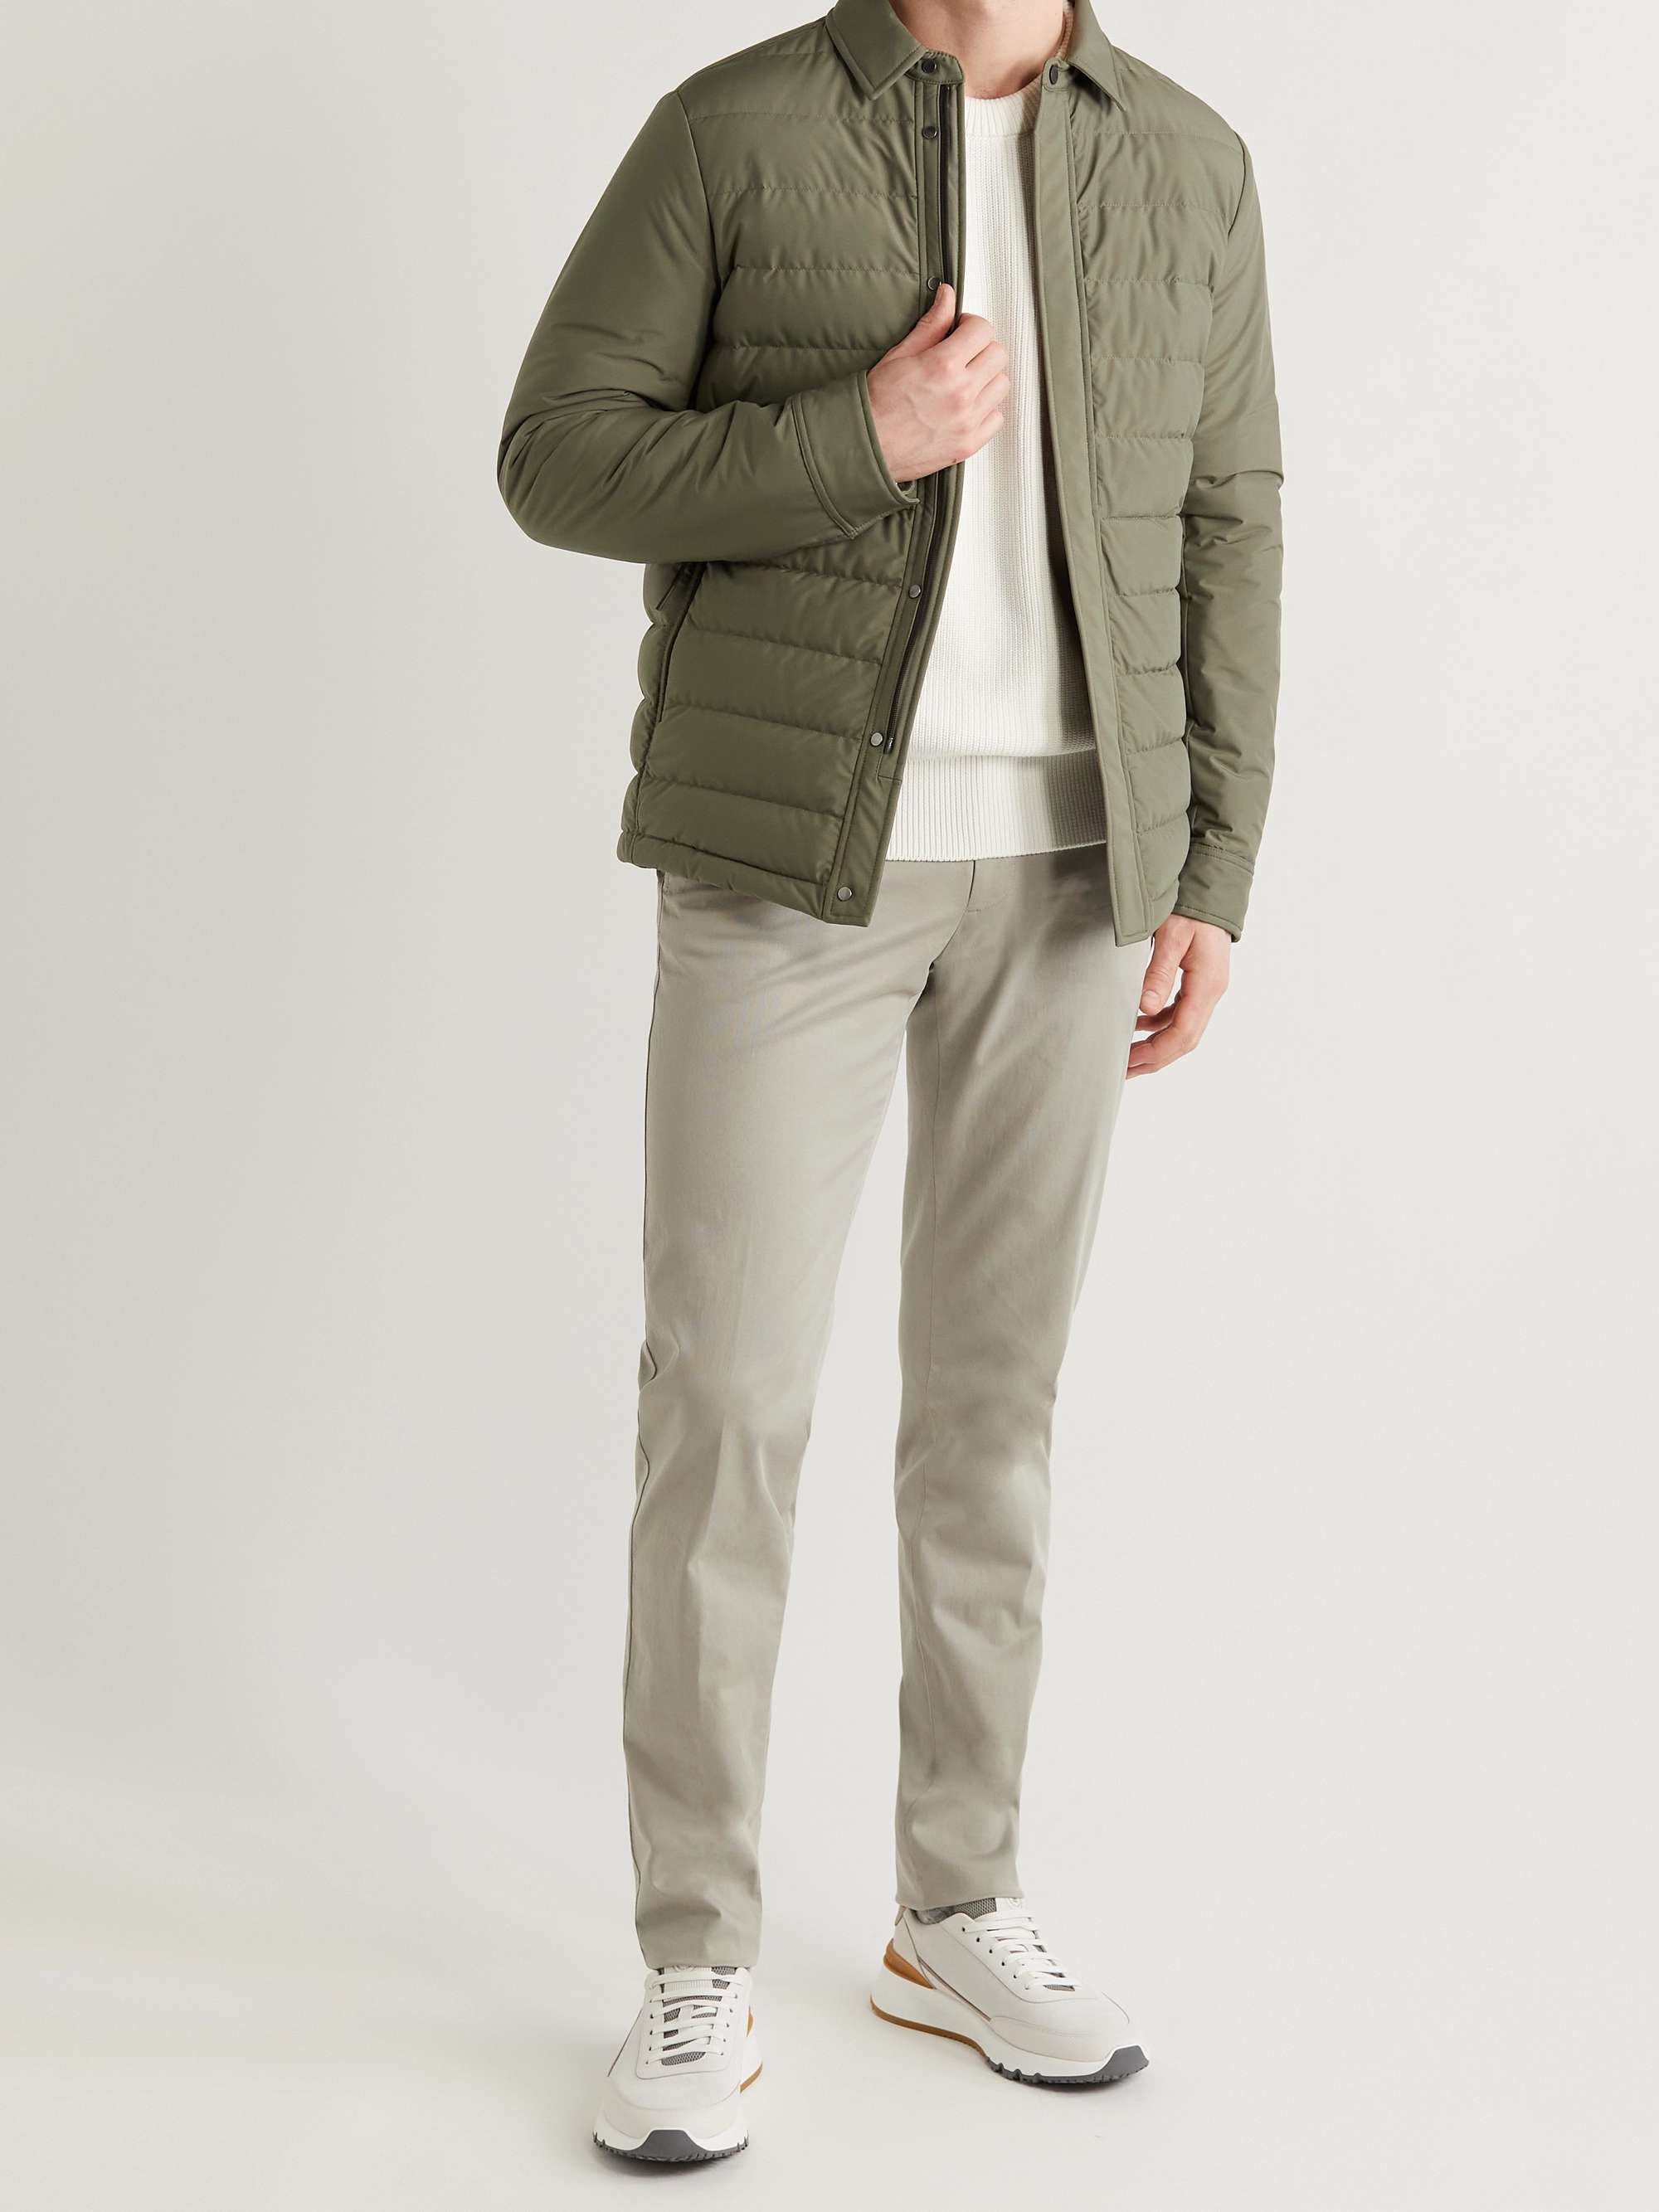 ZEGNA Stratos Quilted Shell Down Jacket